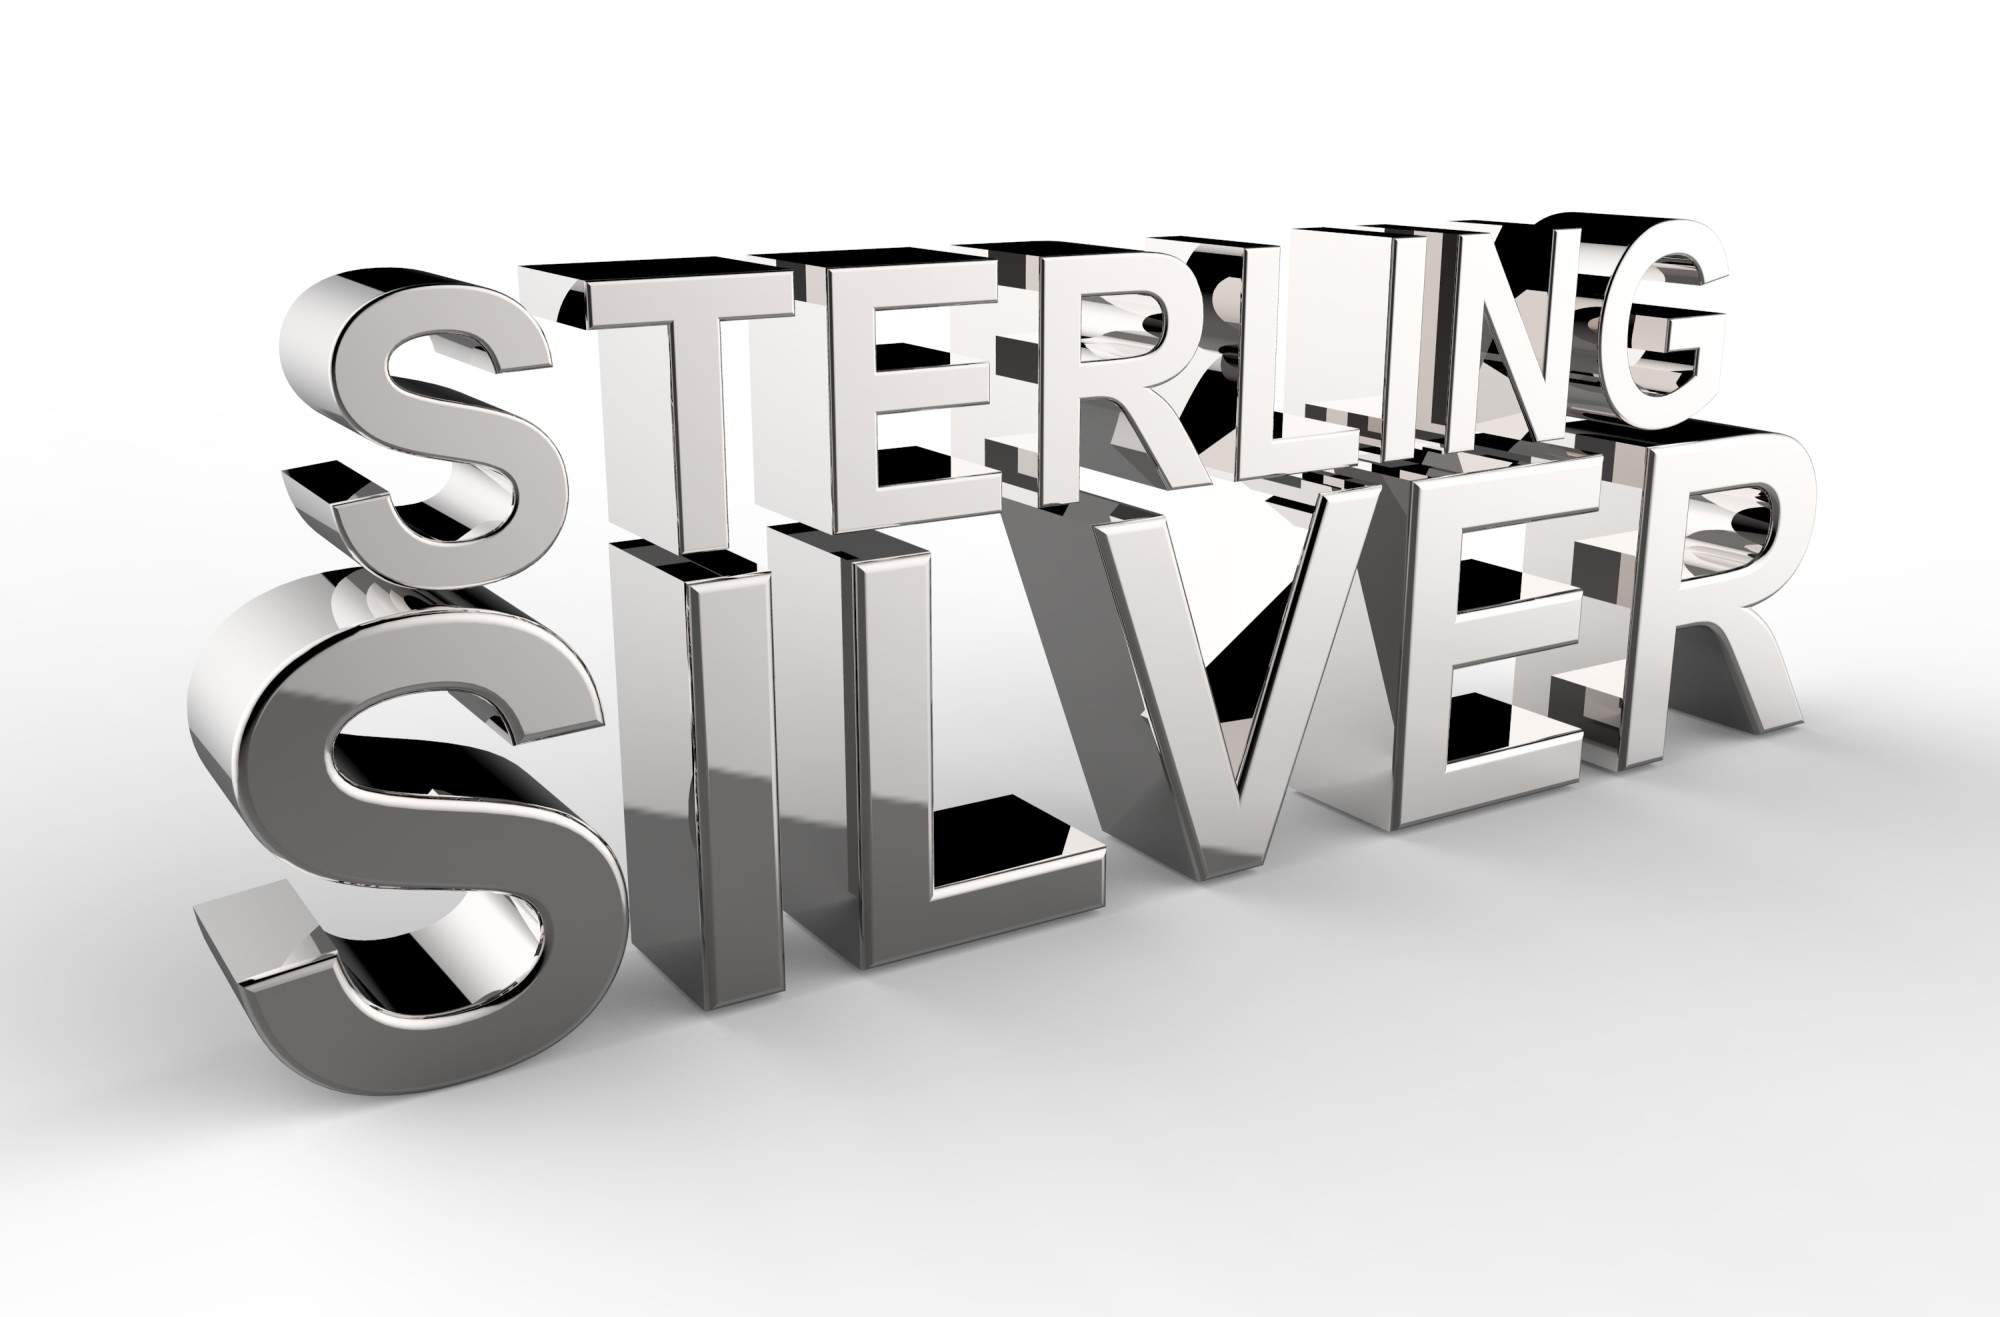 What Are the Different Types of Silver That Exist Today?